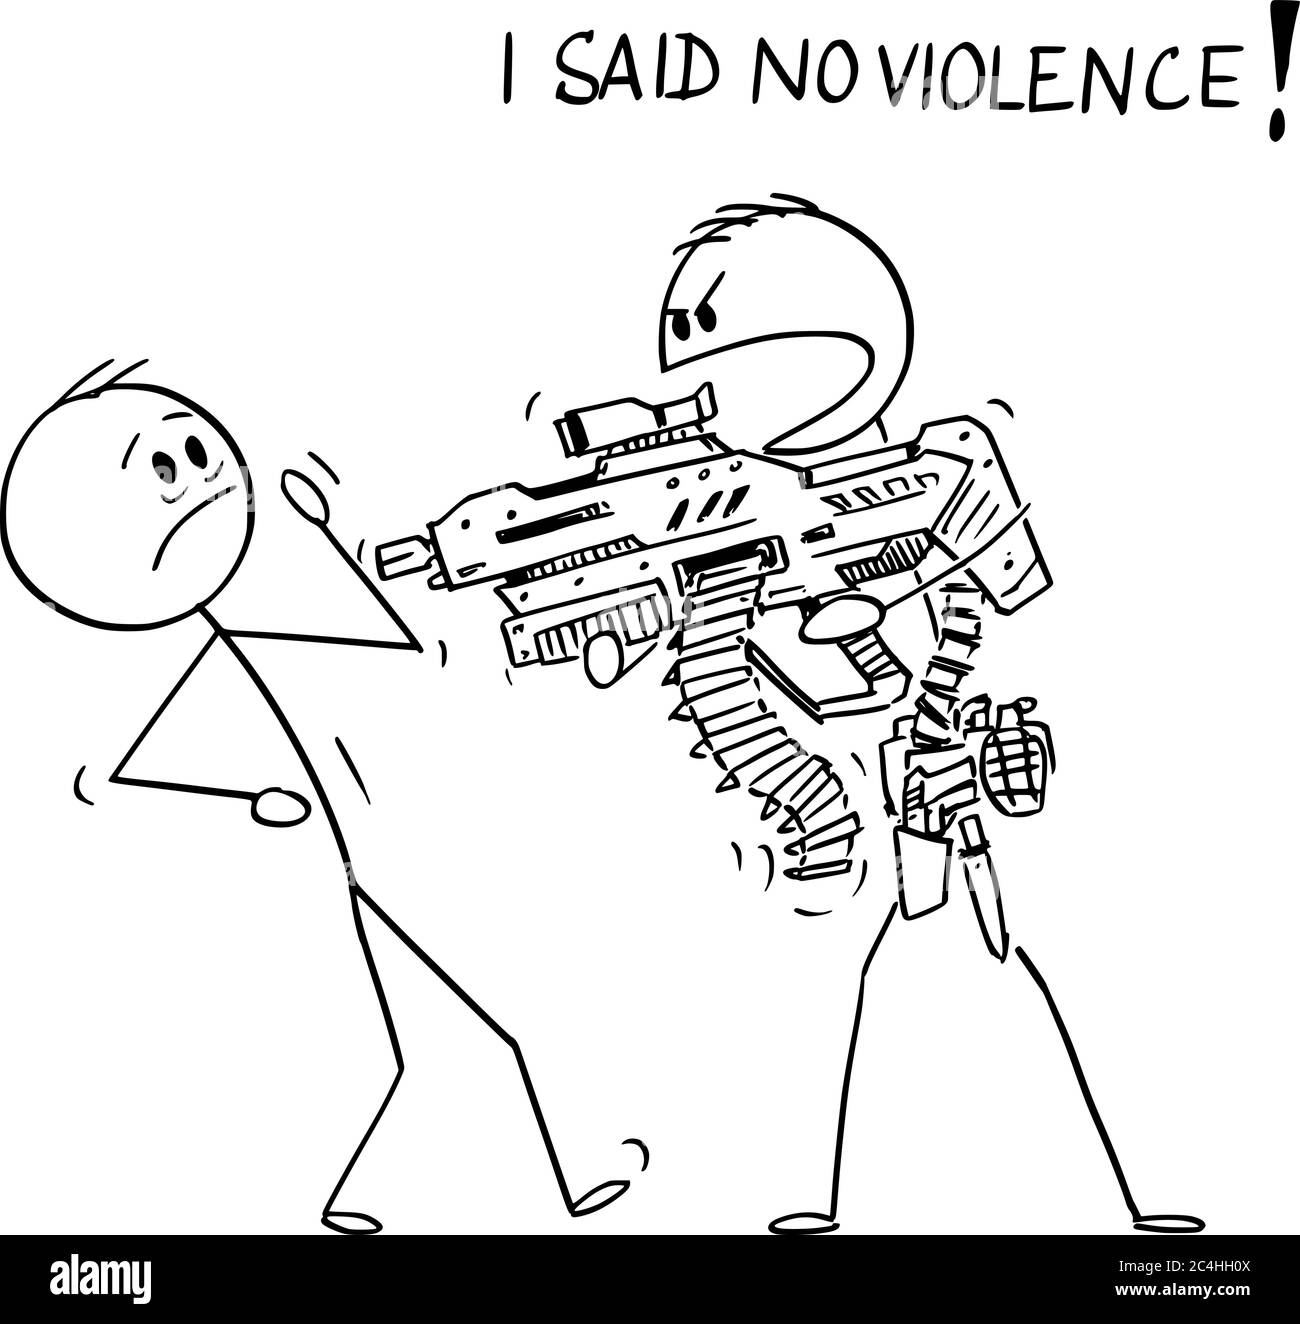 Vector cartoon stick figure drawing conceptual illustration of heavily armed man with generic futuristic weapon threatening unarmed man and saying I said no violence. Stock Vector